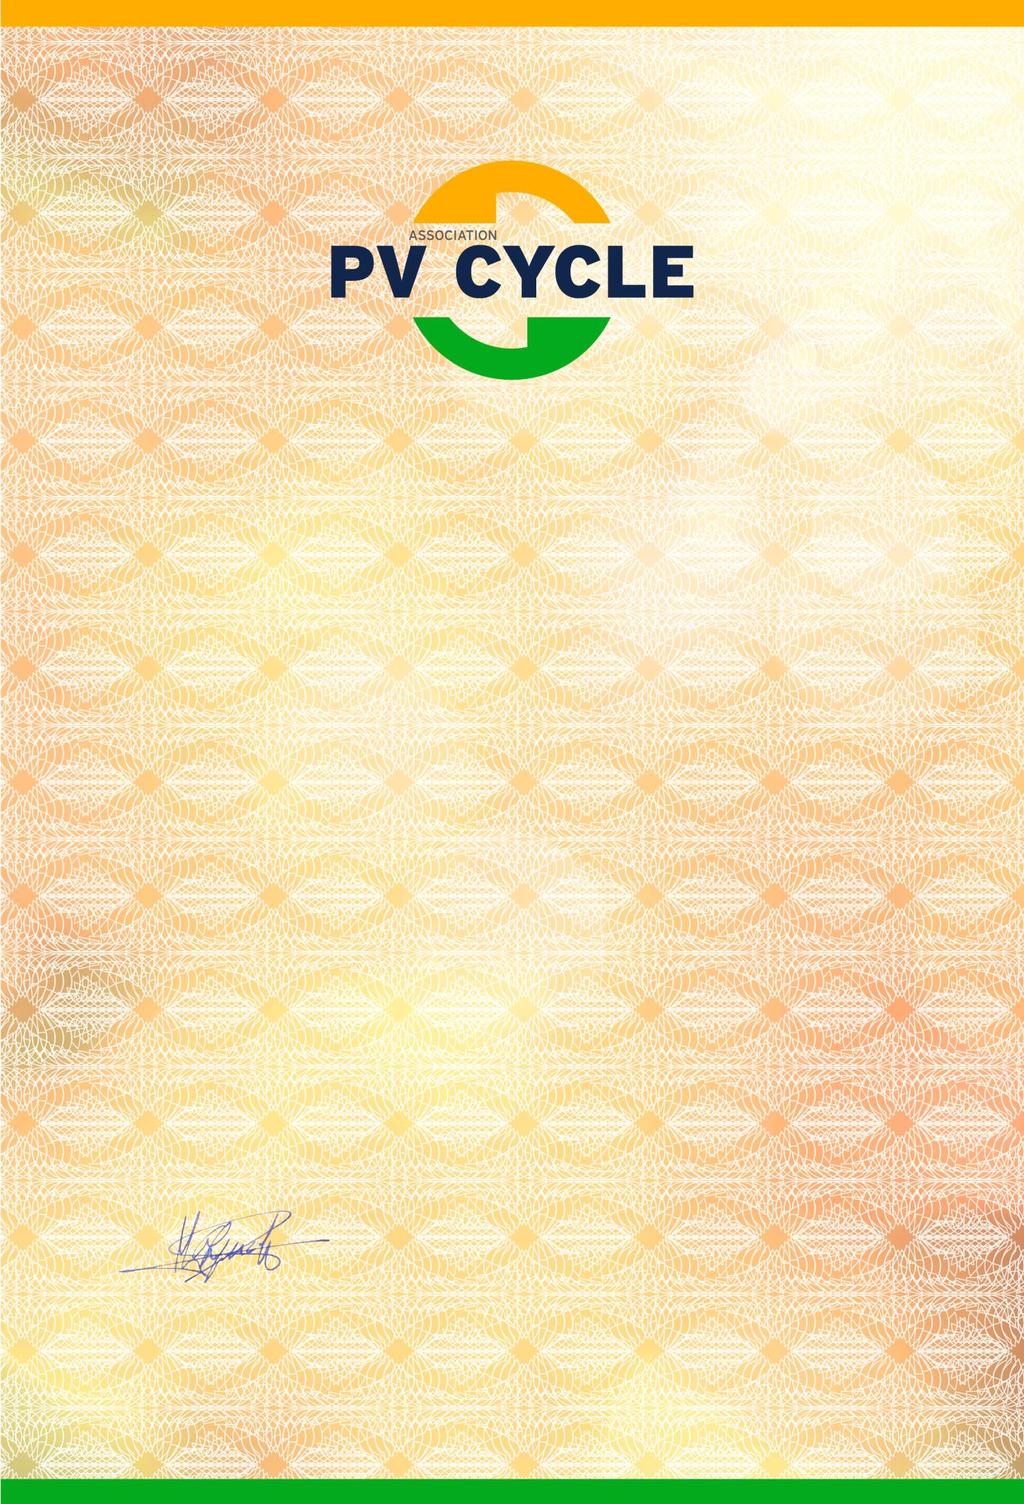 Brussels, 01.01.2013 PV CYCLE Association a.i.s.b.l. declares hereby that based on current commitments Axitec GmbH is member of PV CYCLE a.i.s.b.l., which organizes the take-back and recycling of photovoltaic module waste in Europe*.